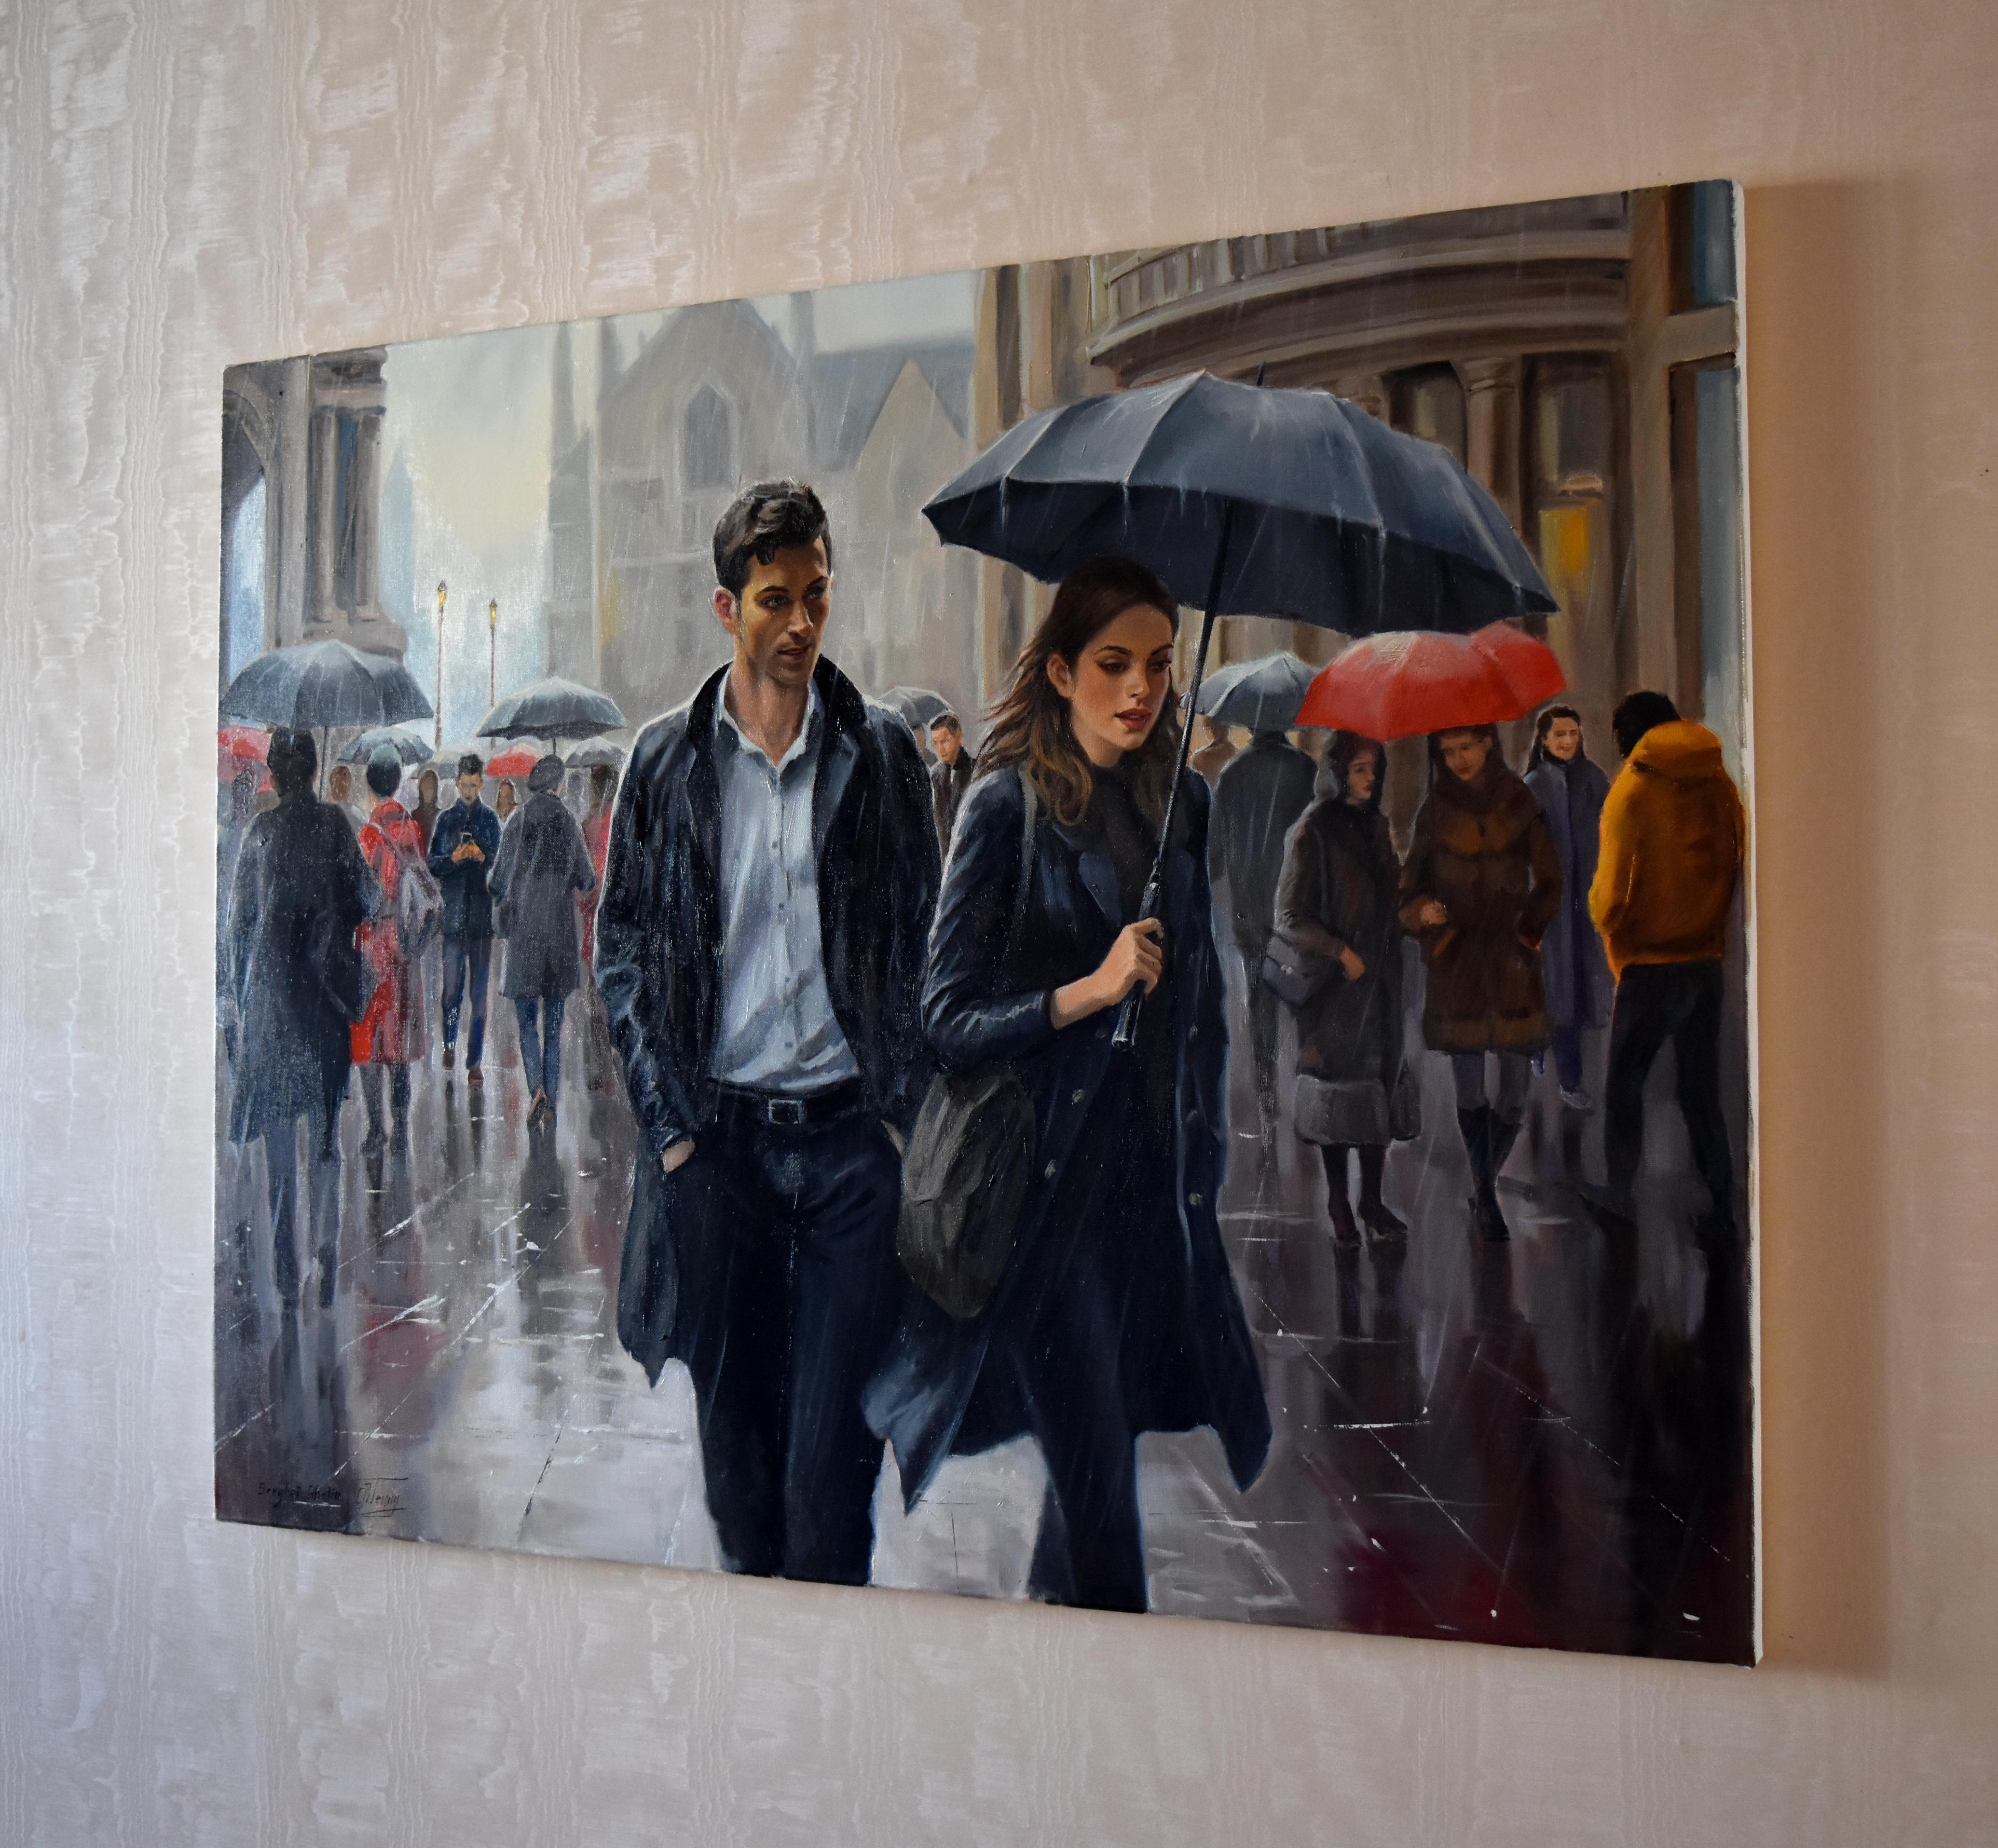 Dating in the rain For Sale 1